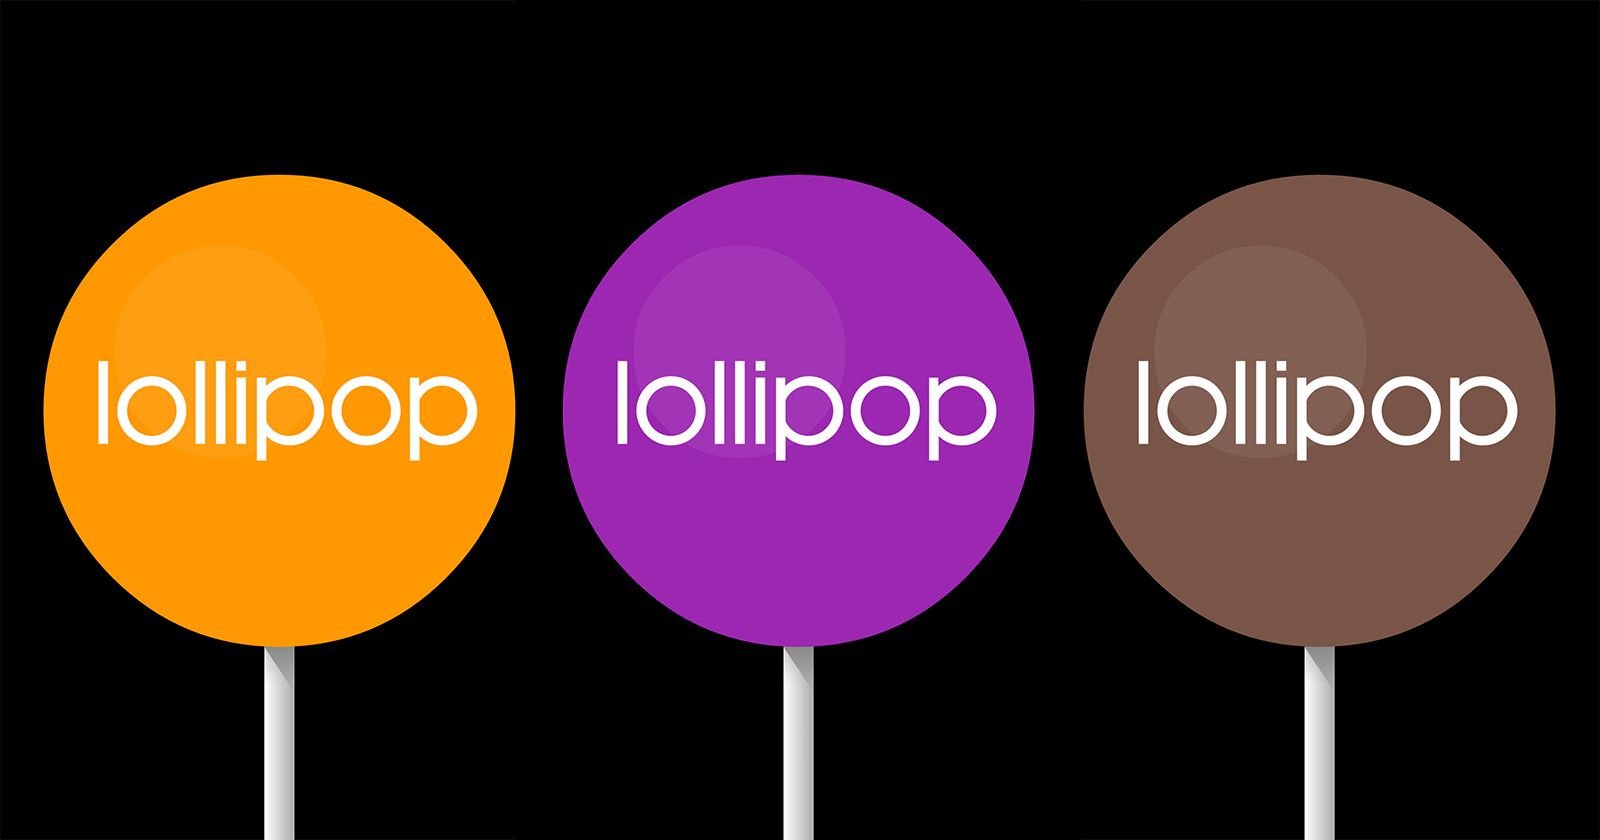 new android lollipop screens confirm flappy android easter egg 3 nov release for nexus 7 also tipped image 1